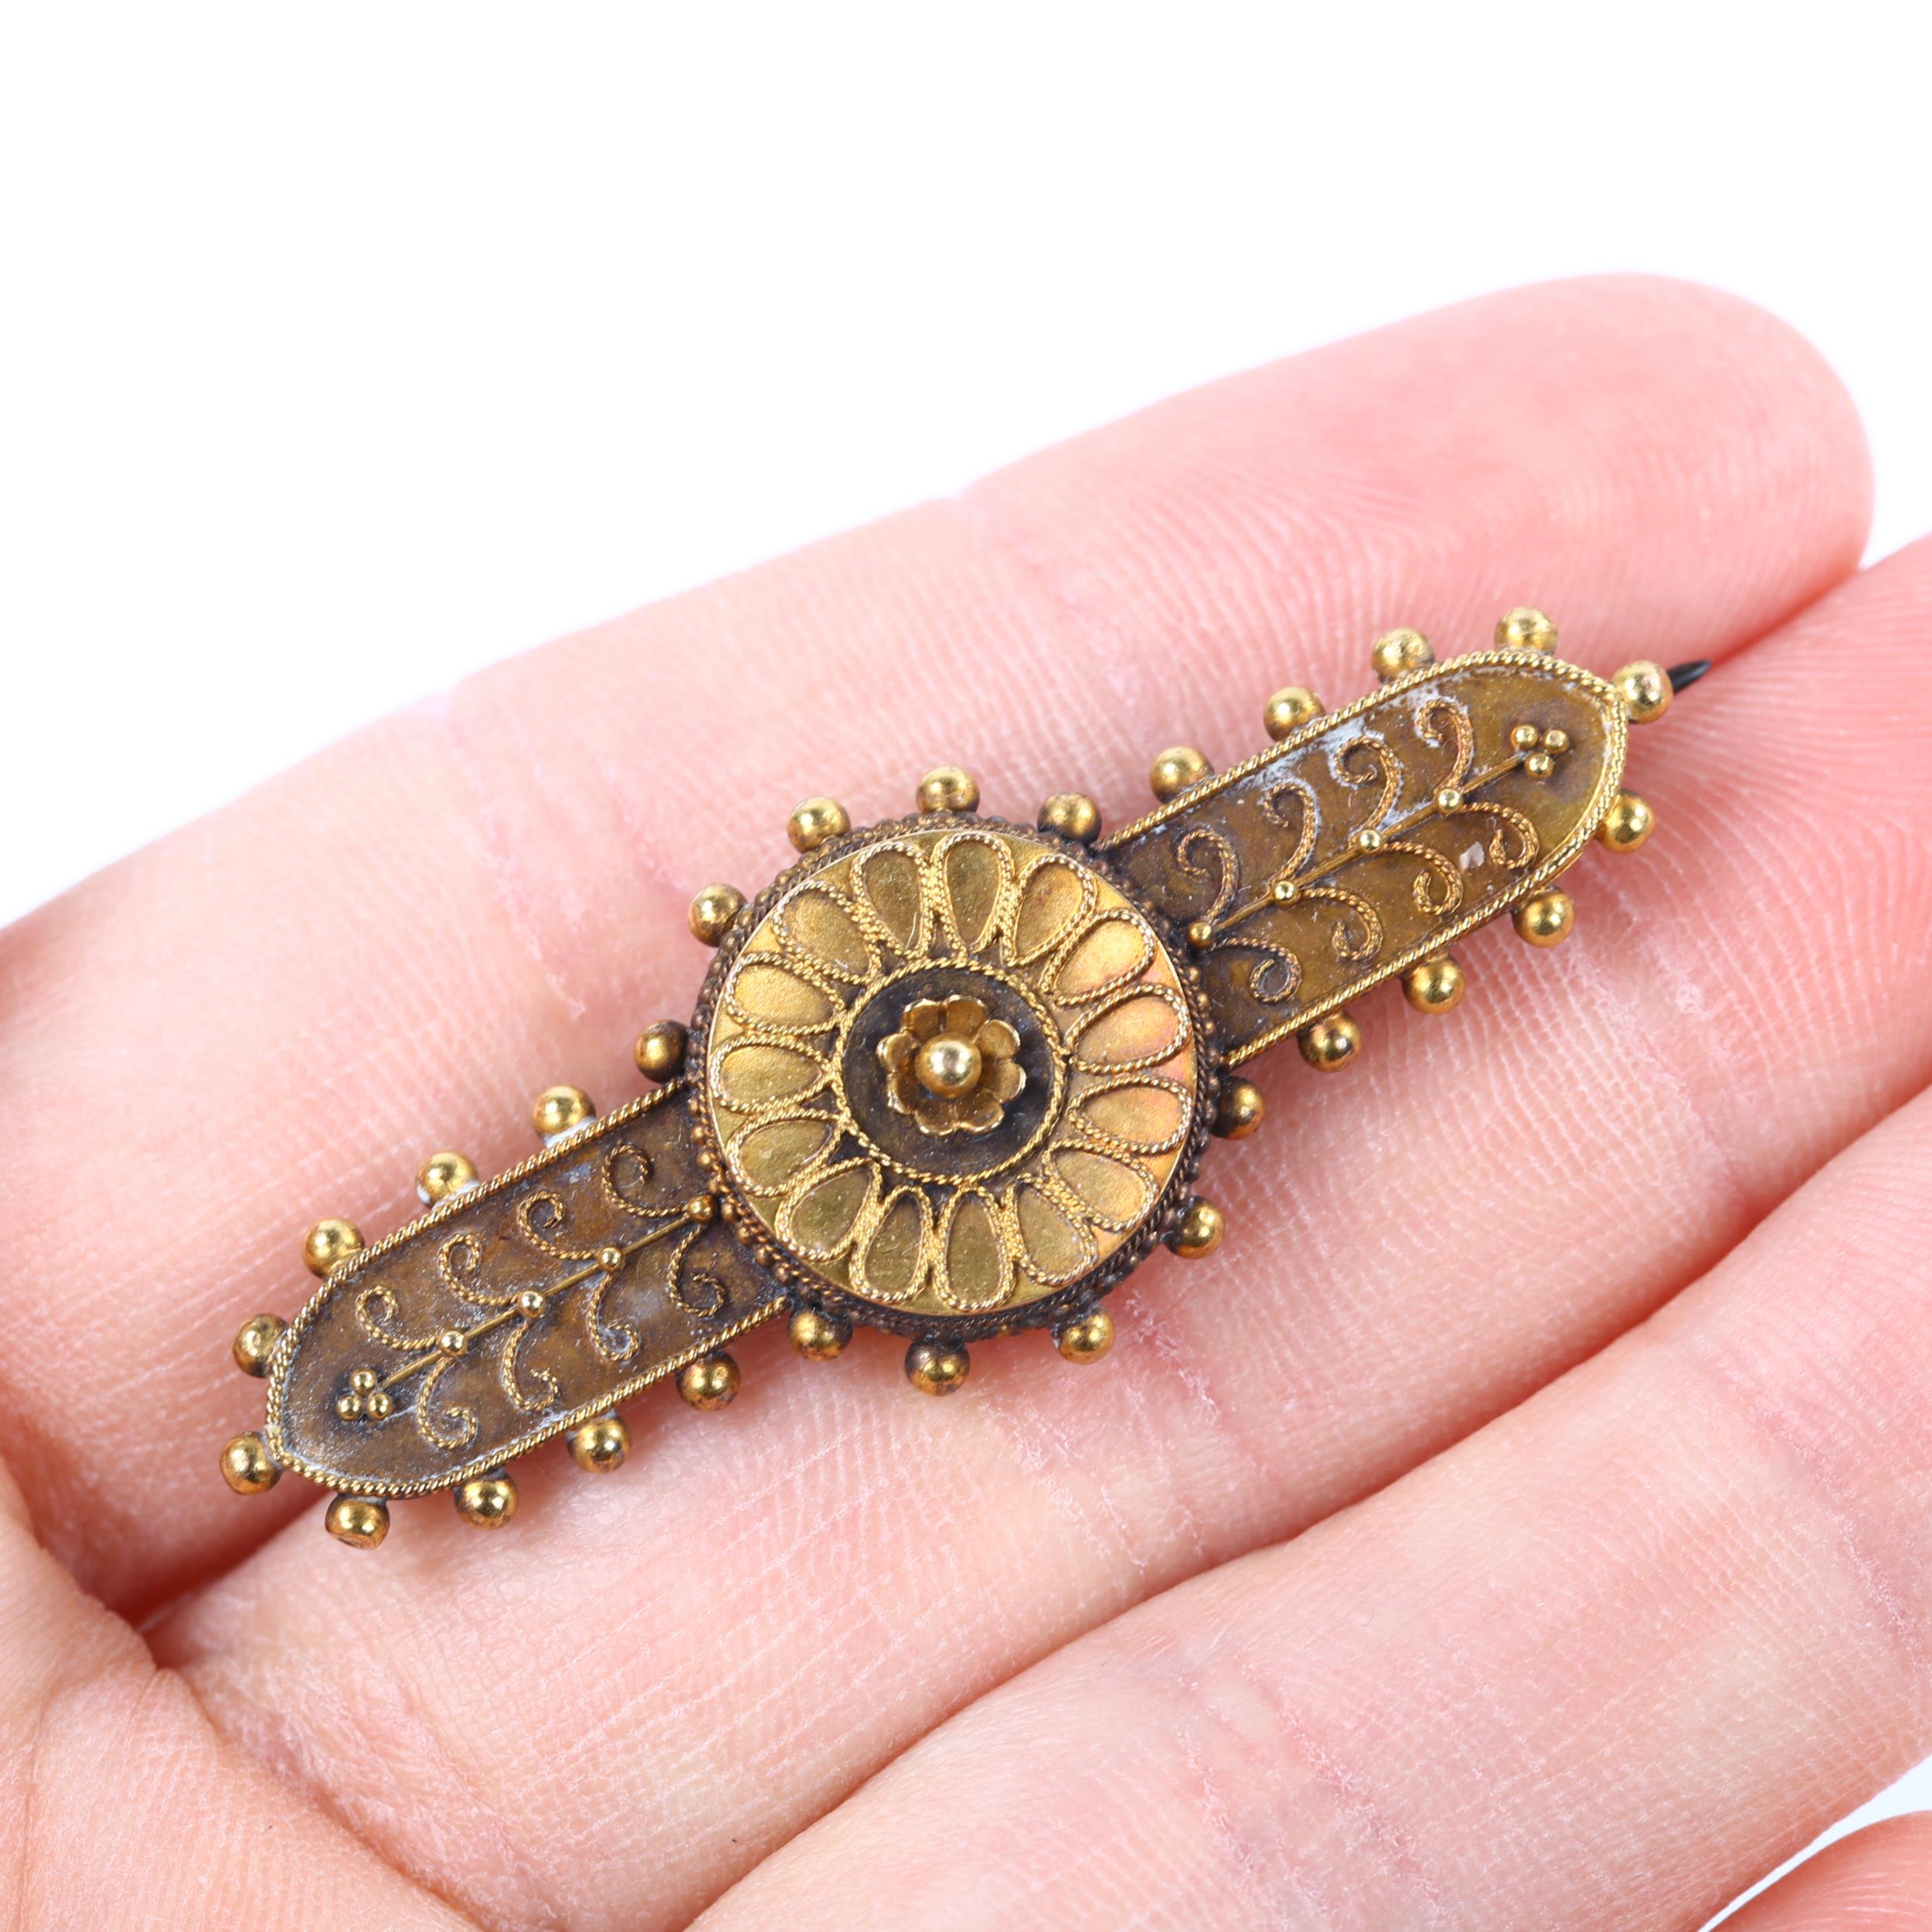 A Victorian 15ct gold Etruscan Revival brooch, with memorial inscription "In remembrance of 10 years - Image 4 of 4